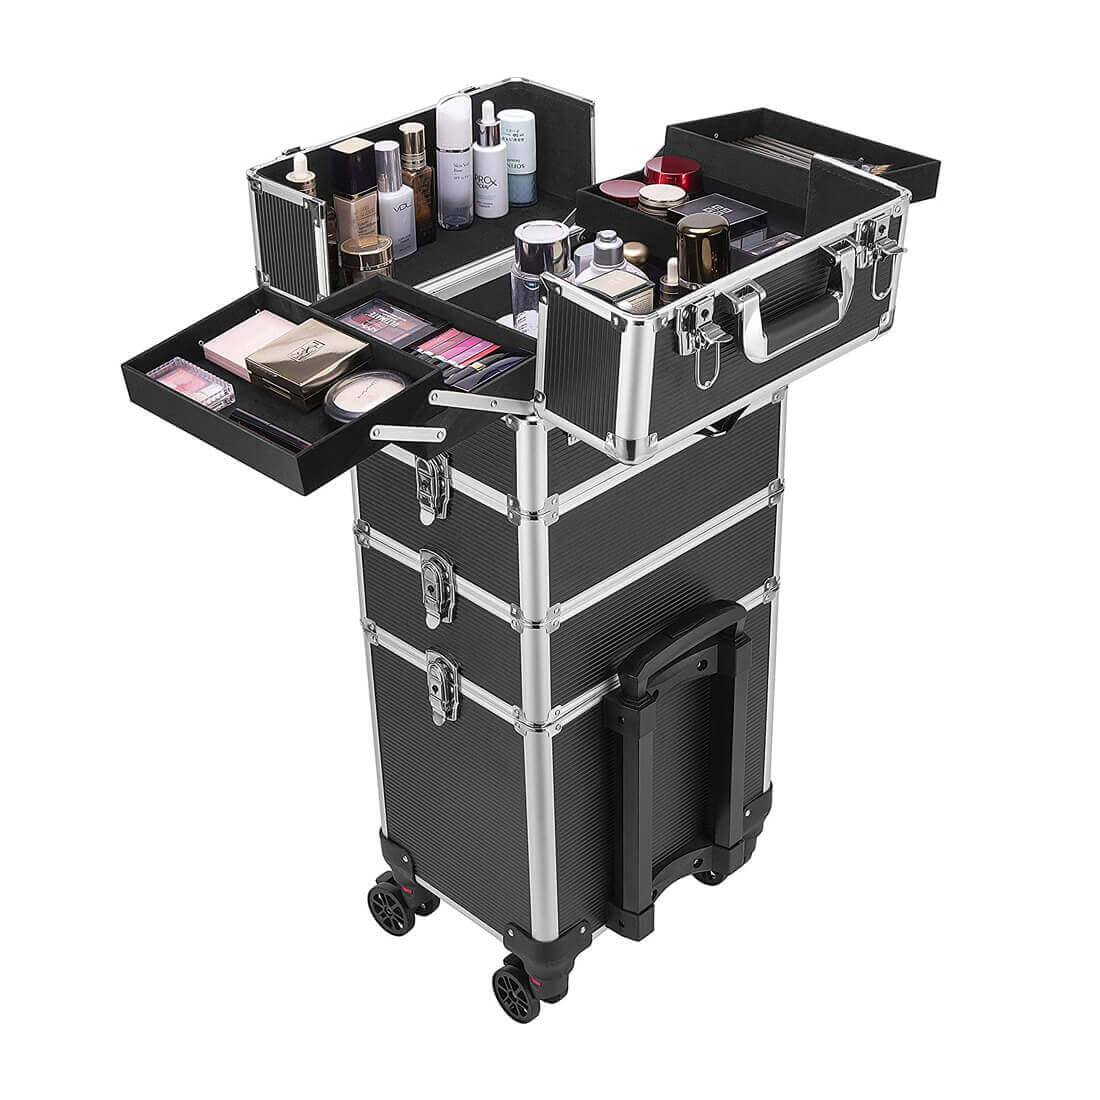 rijst trolleybus Meerdere VIVOHOME 4 in 1 Makeup Cosmetic Organizer Box Rolling Trolley